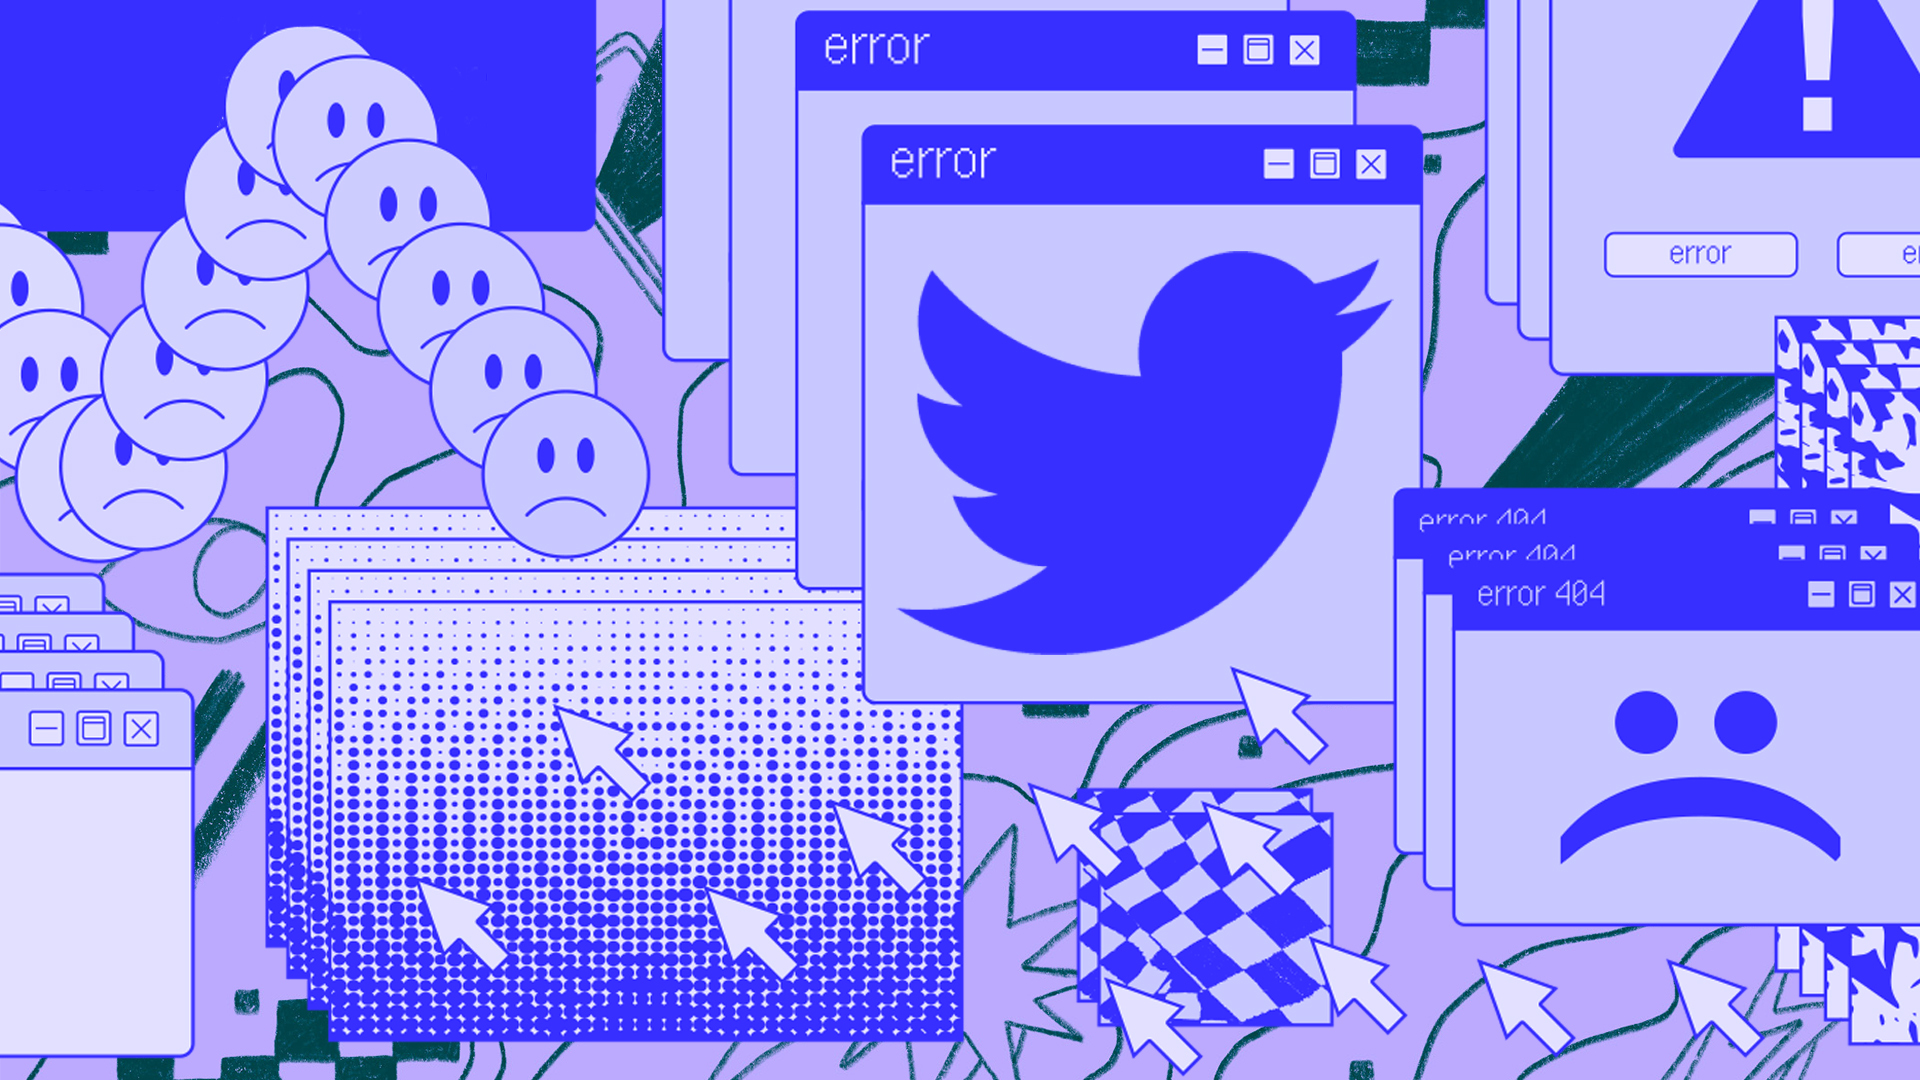 Illustration of the Twitter logo, screens, and frowny emojis.